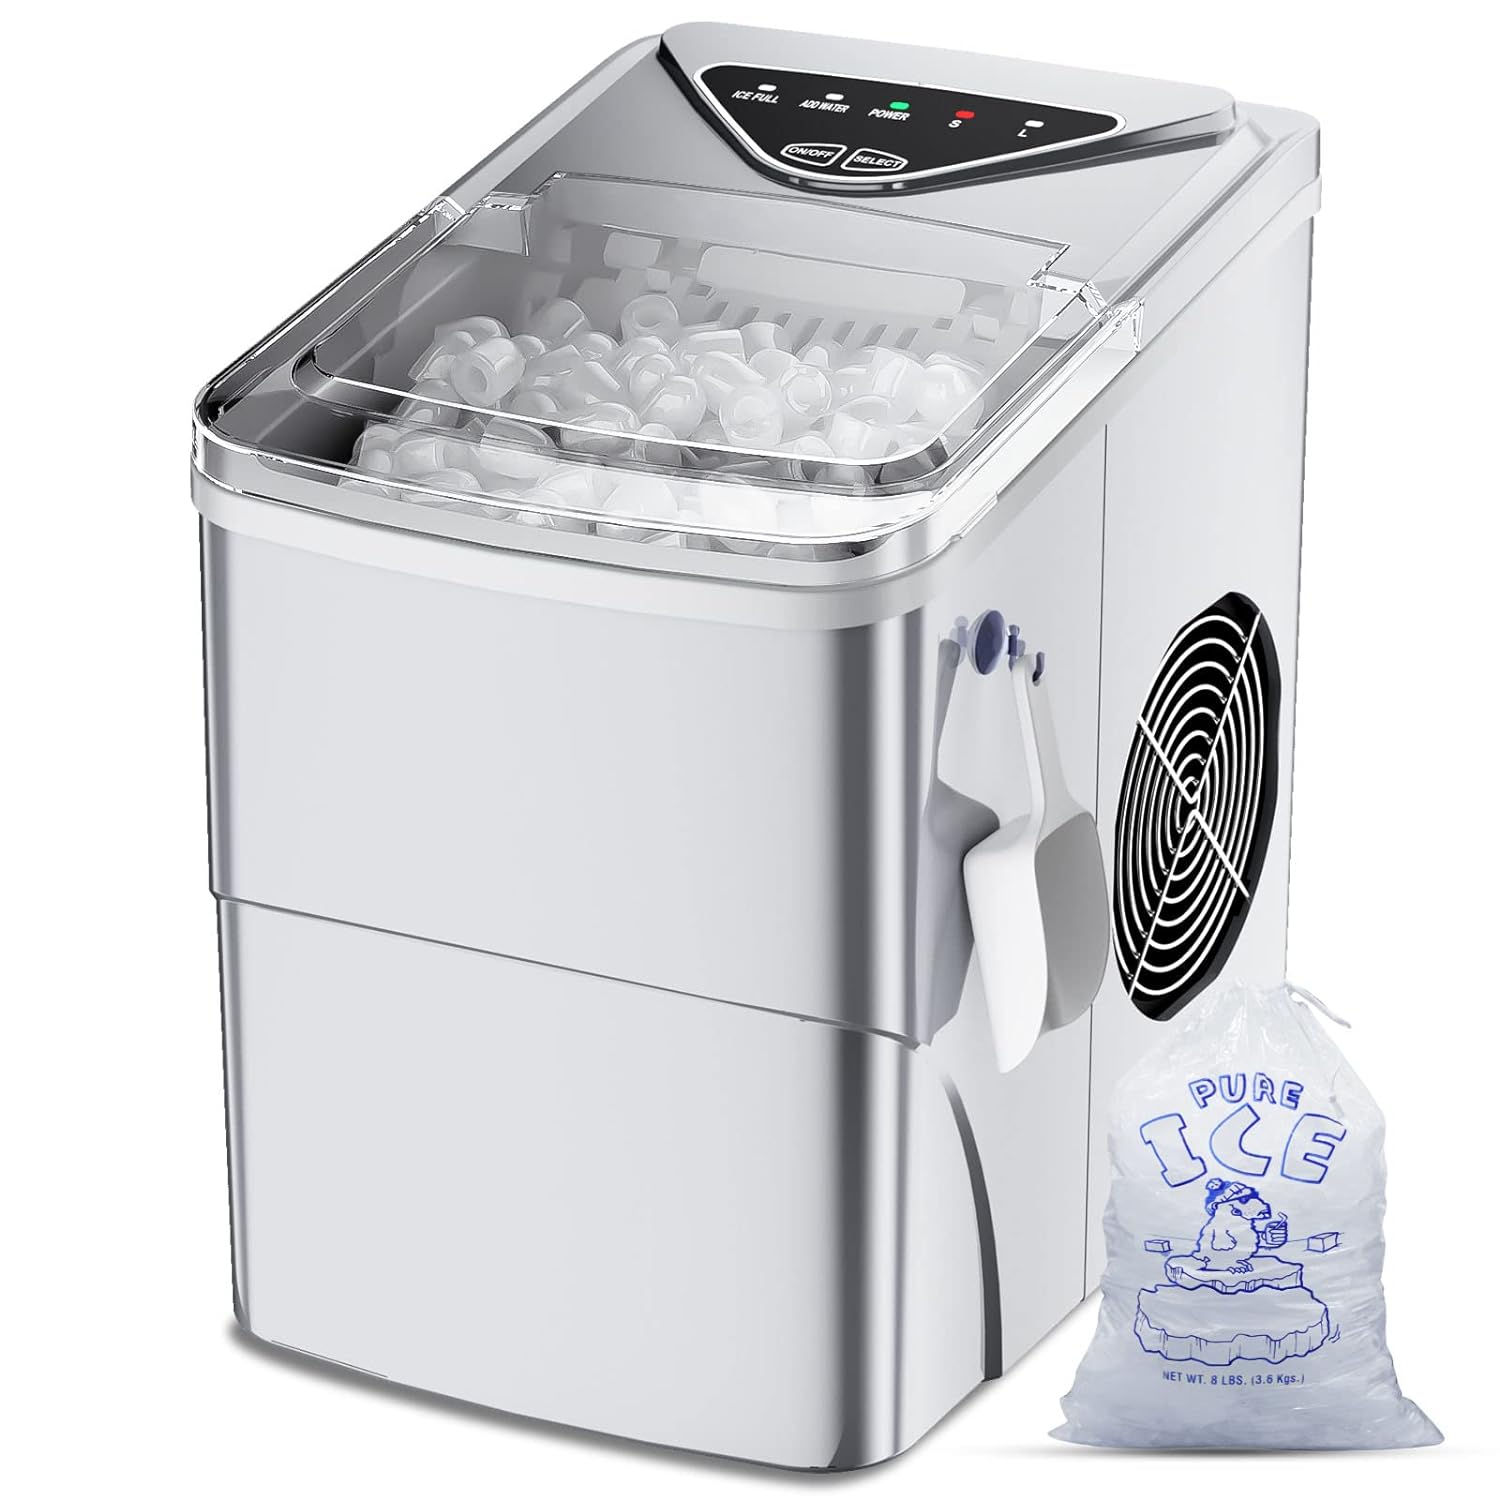 I was hesitant to buy an ice maker online bc you never know what your going to get. My brother purchased this one and it is literally the perfect, frosted, easy to chew, hospital type ice... So I ended up purchasing one for myself. Comparable to Chick-fil-A ice. The only thing I don't like about it is that is doesn't fill the ice box completely unless you use the scoop and push the ice to the left so it can keep filling bc once the ice piles up like a mountain, it stops dropping ice until you pu